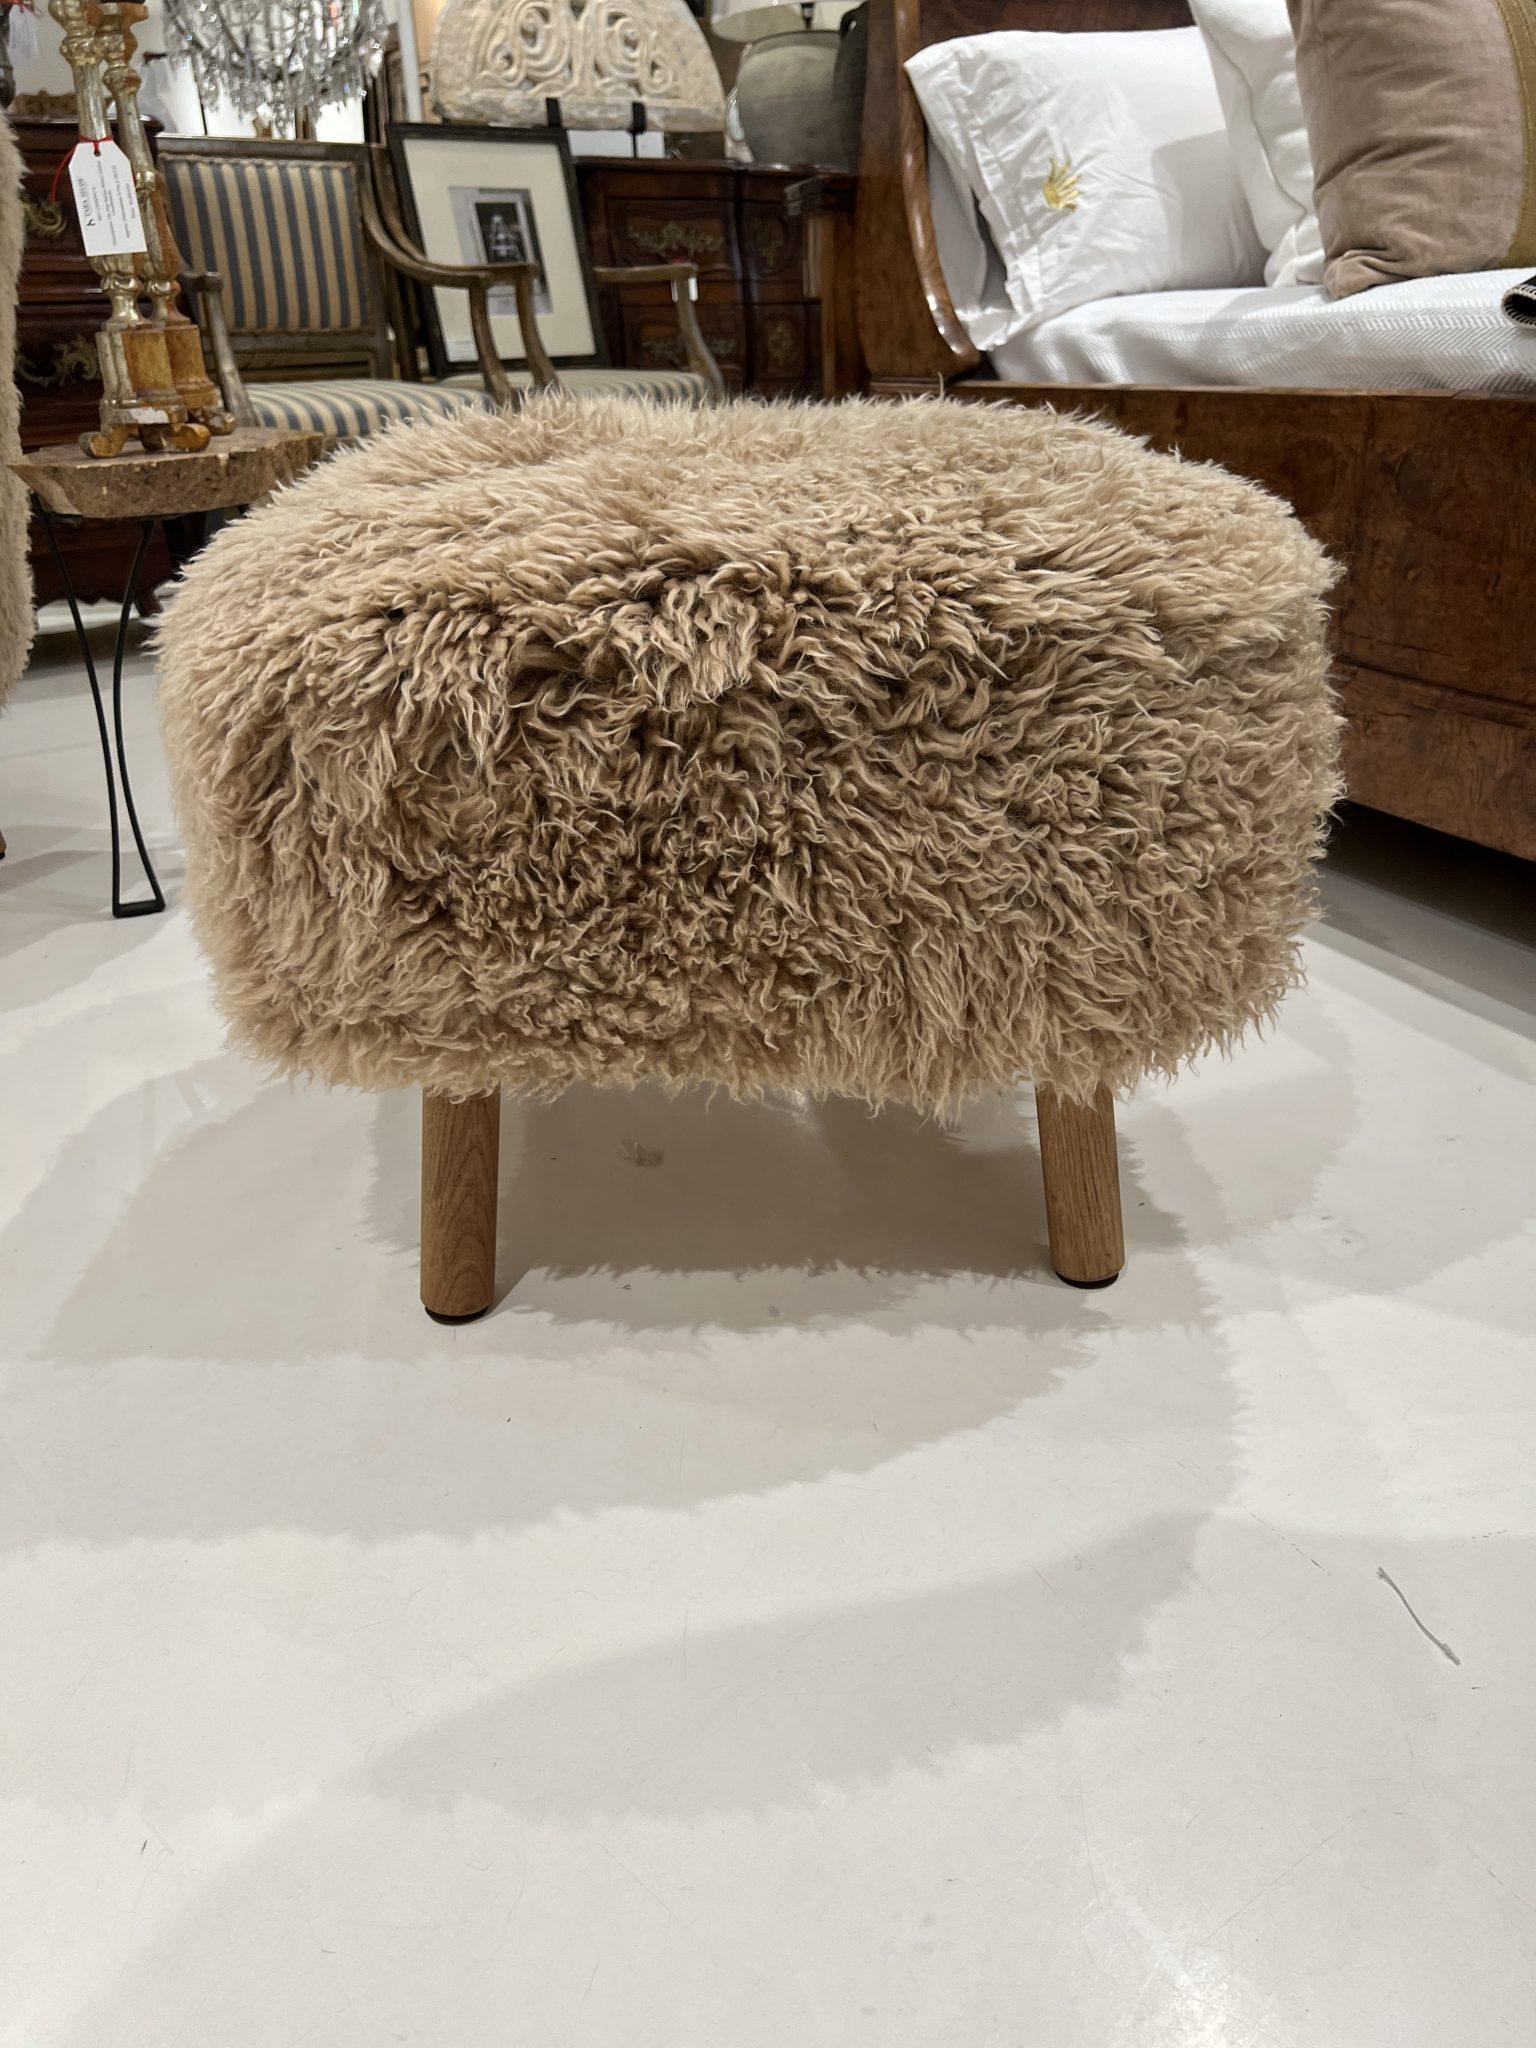 New Zealand sheepskin chair and ottoman are perfect for bedroom, nook or any space where you want to curl up with a book. Brings chic and fun to any space.
Ottoman Dimensions :
23″W x 24″D x 18″H